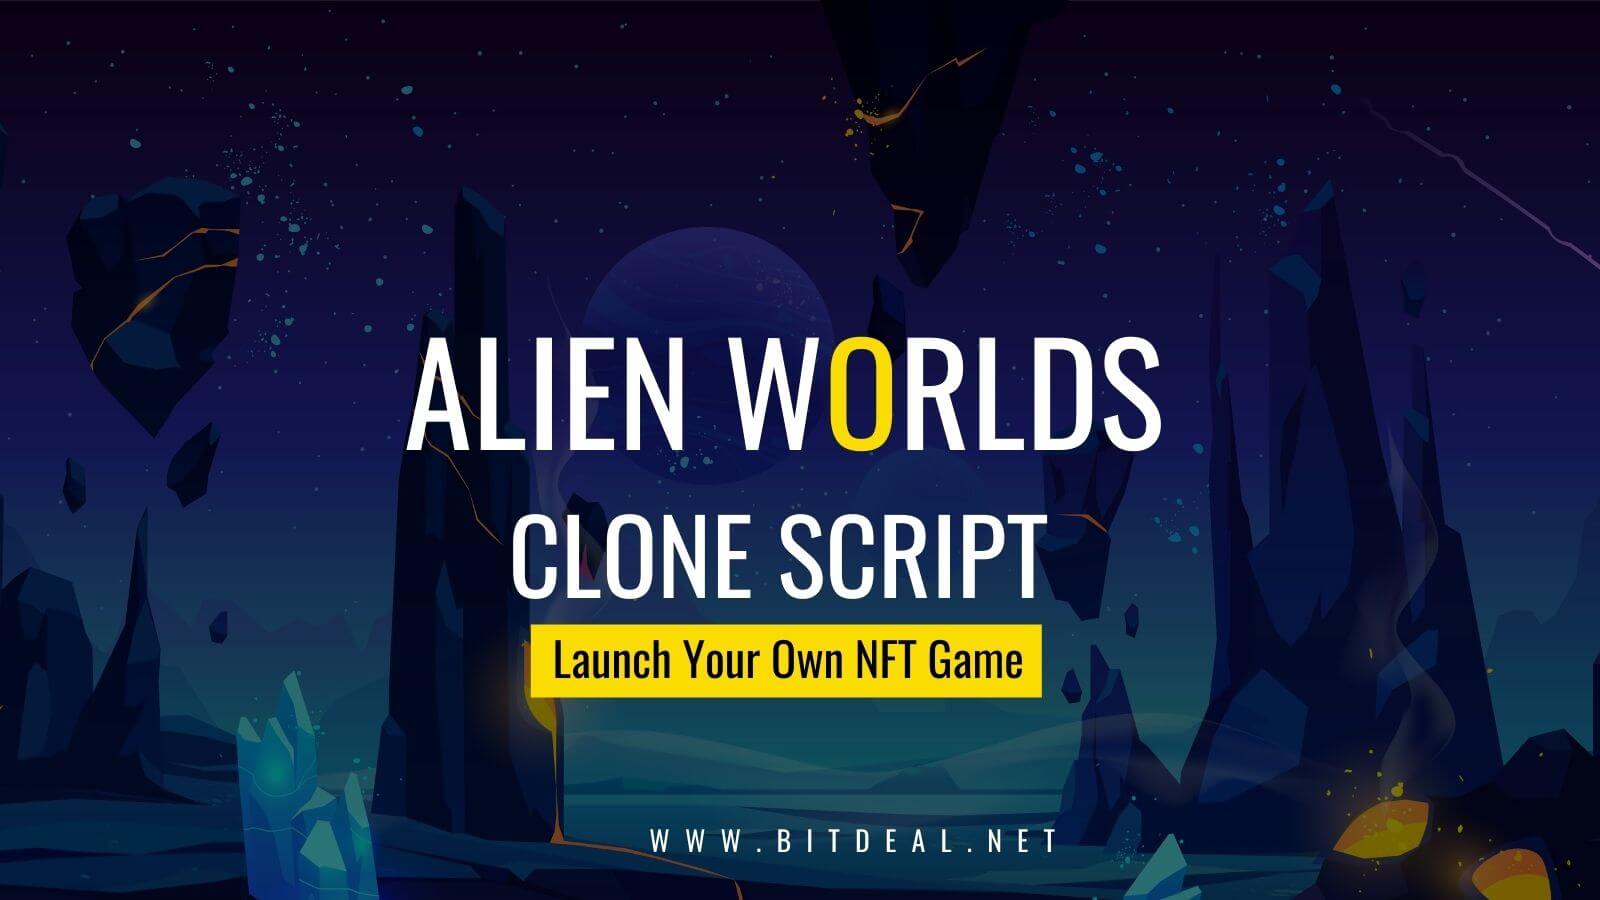 How to create an NFT based Gaming Platform like Alien Worlds?